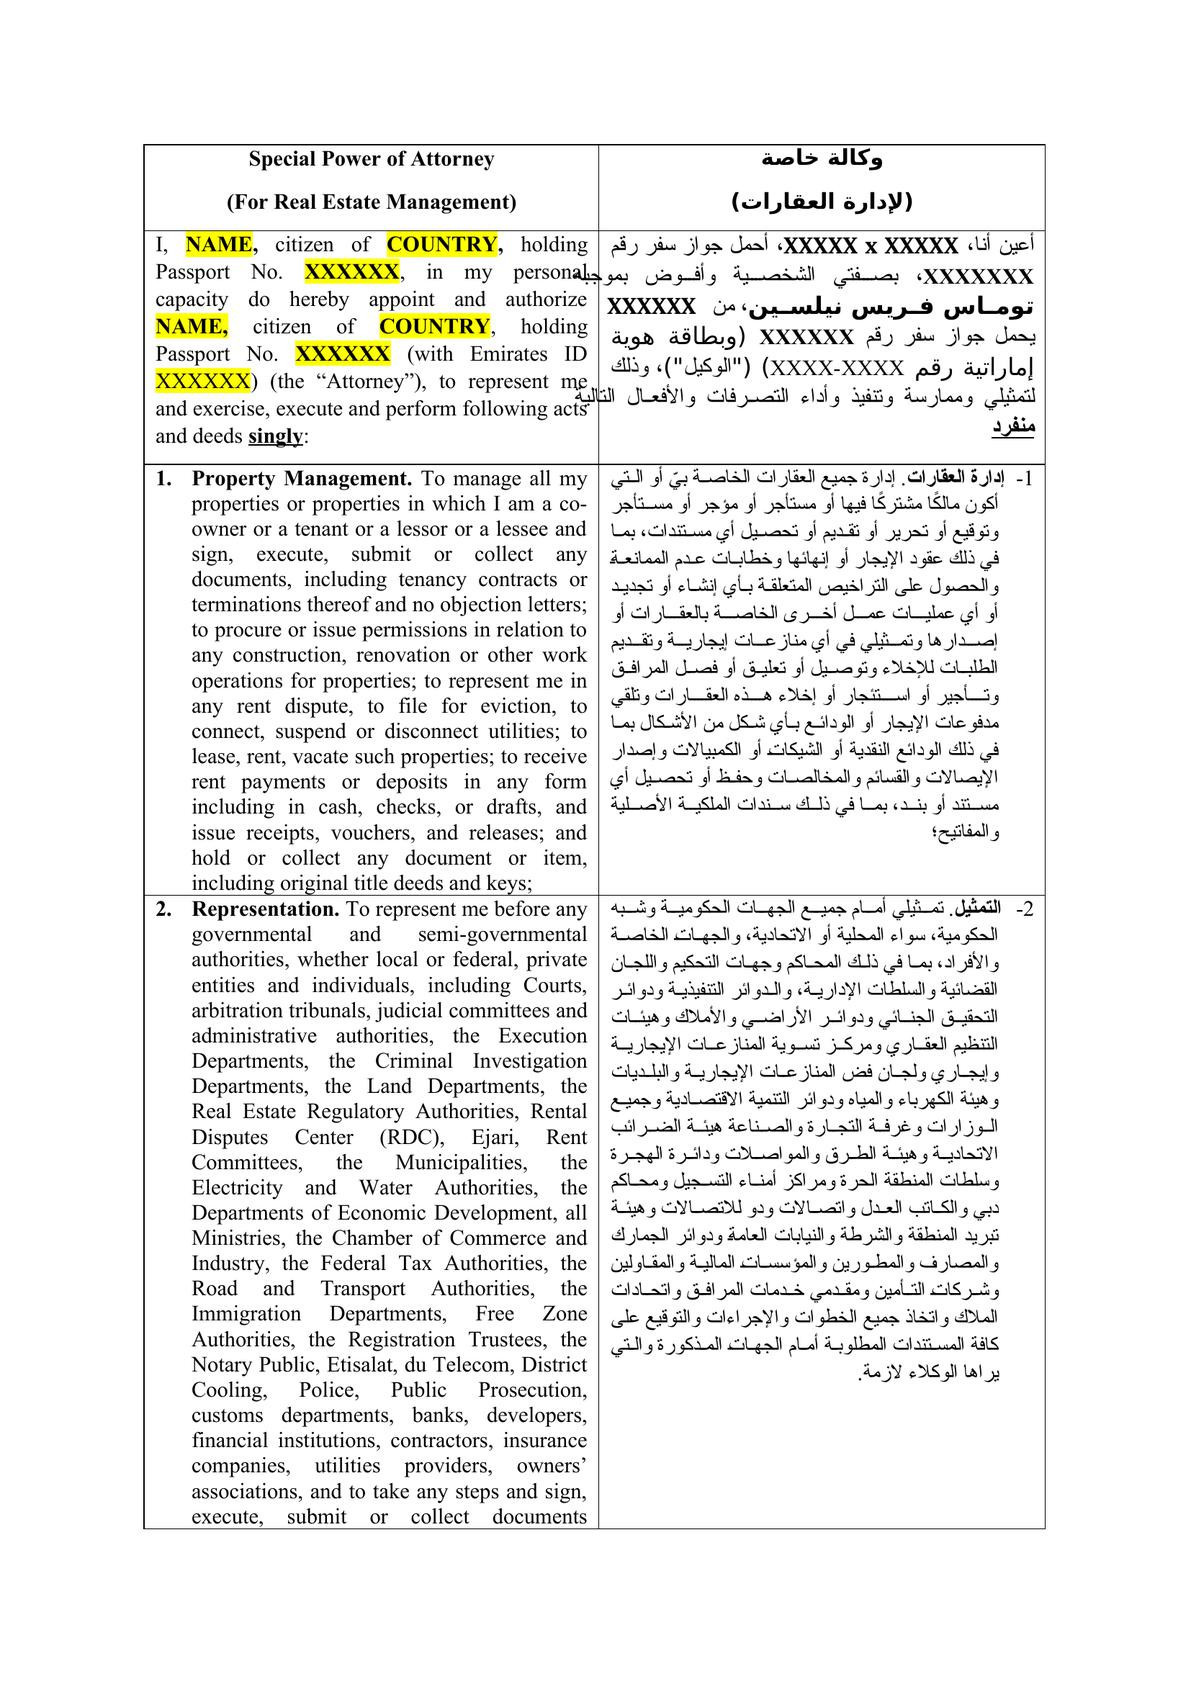 Power of Attorney in English and Arabic-0